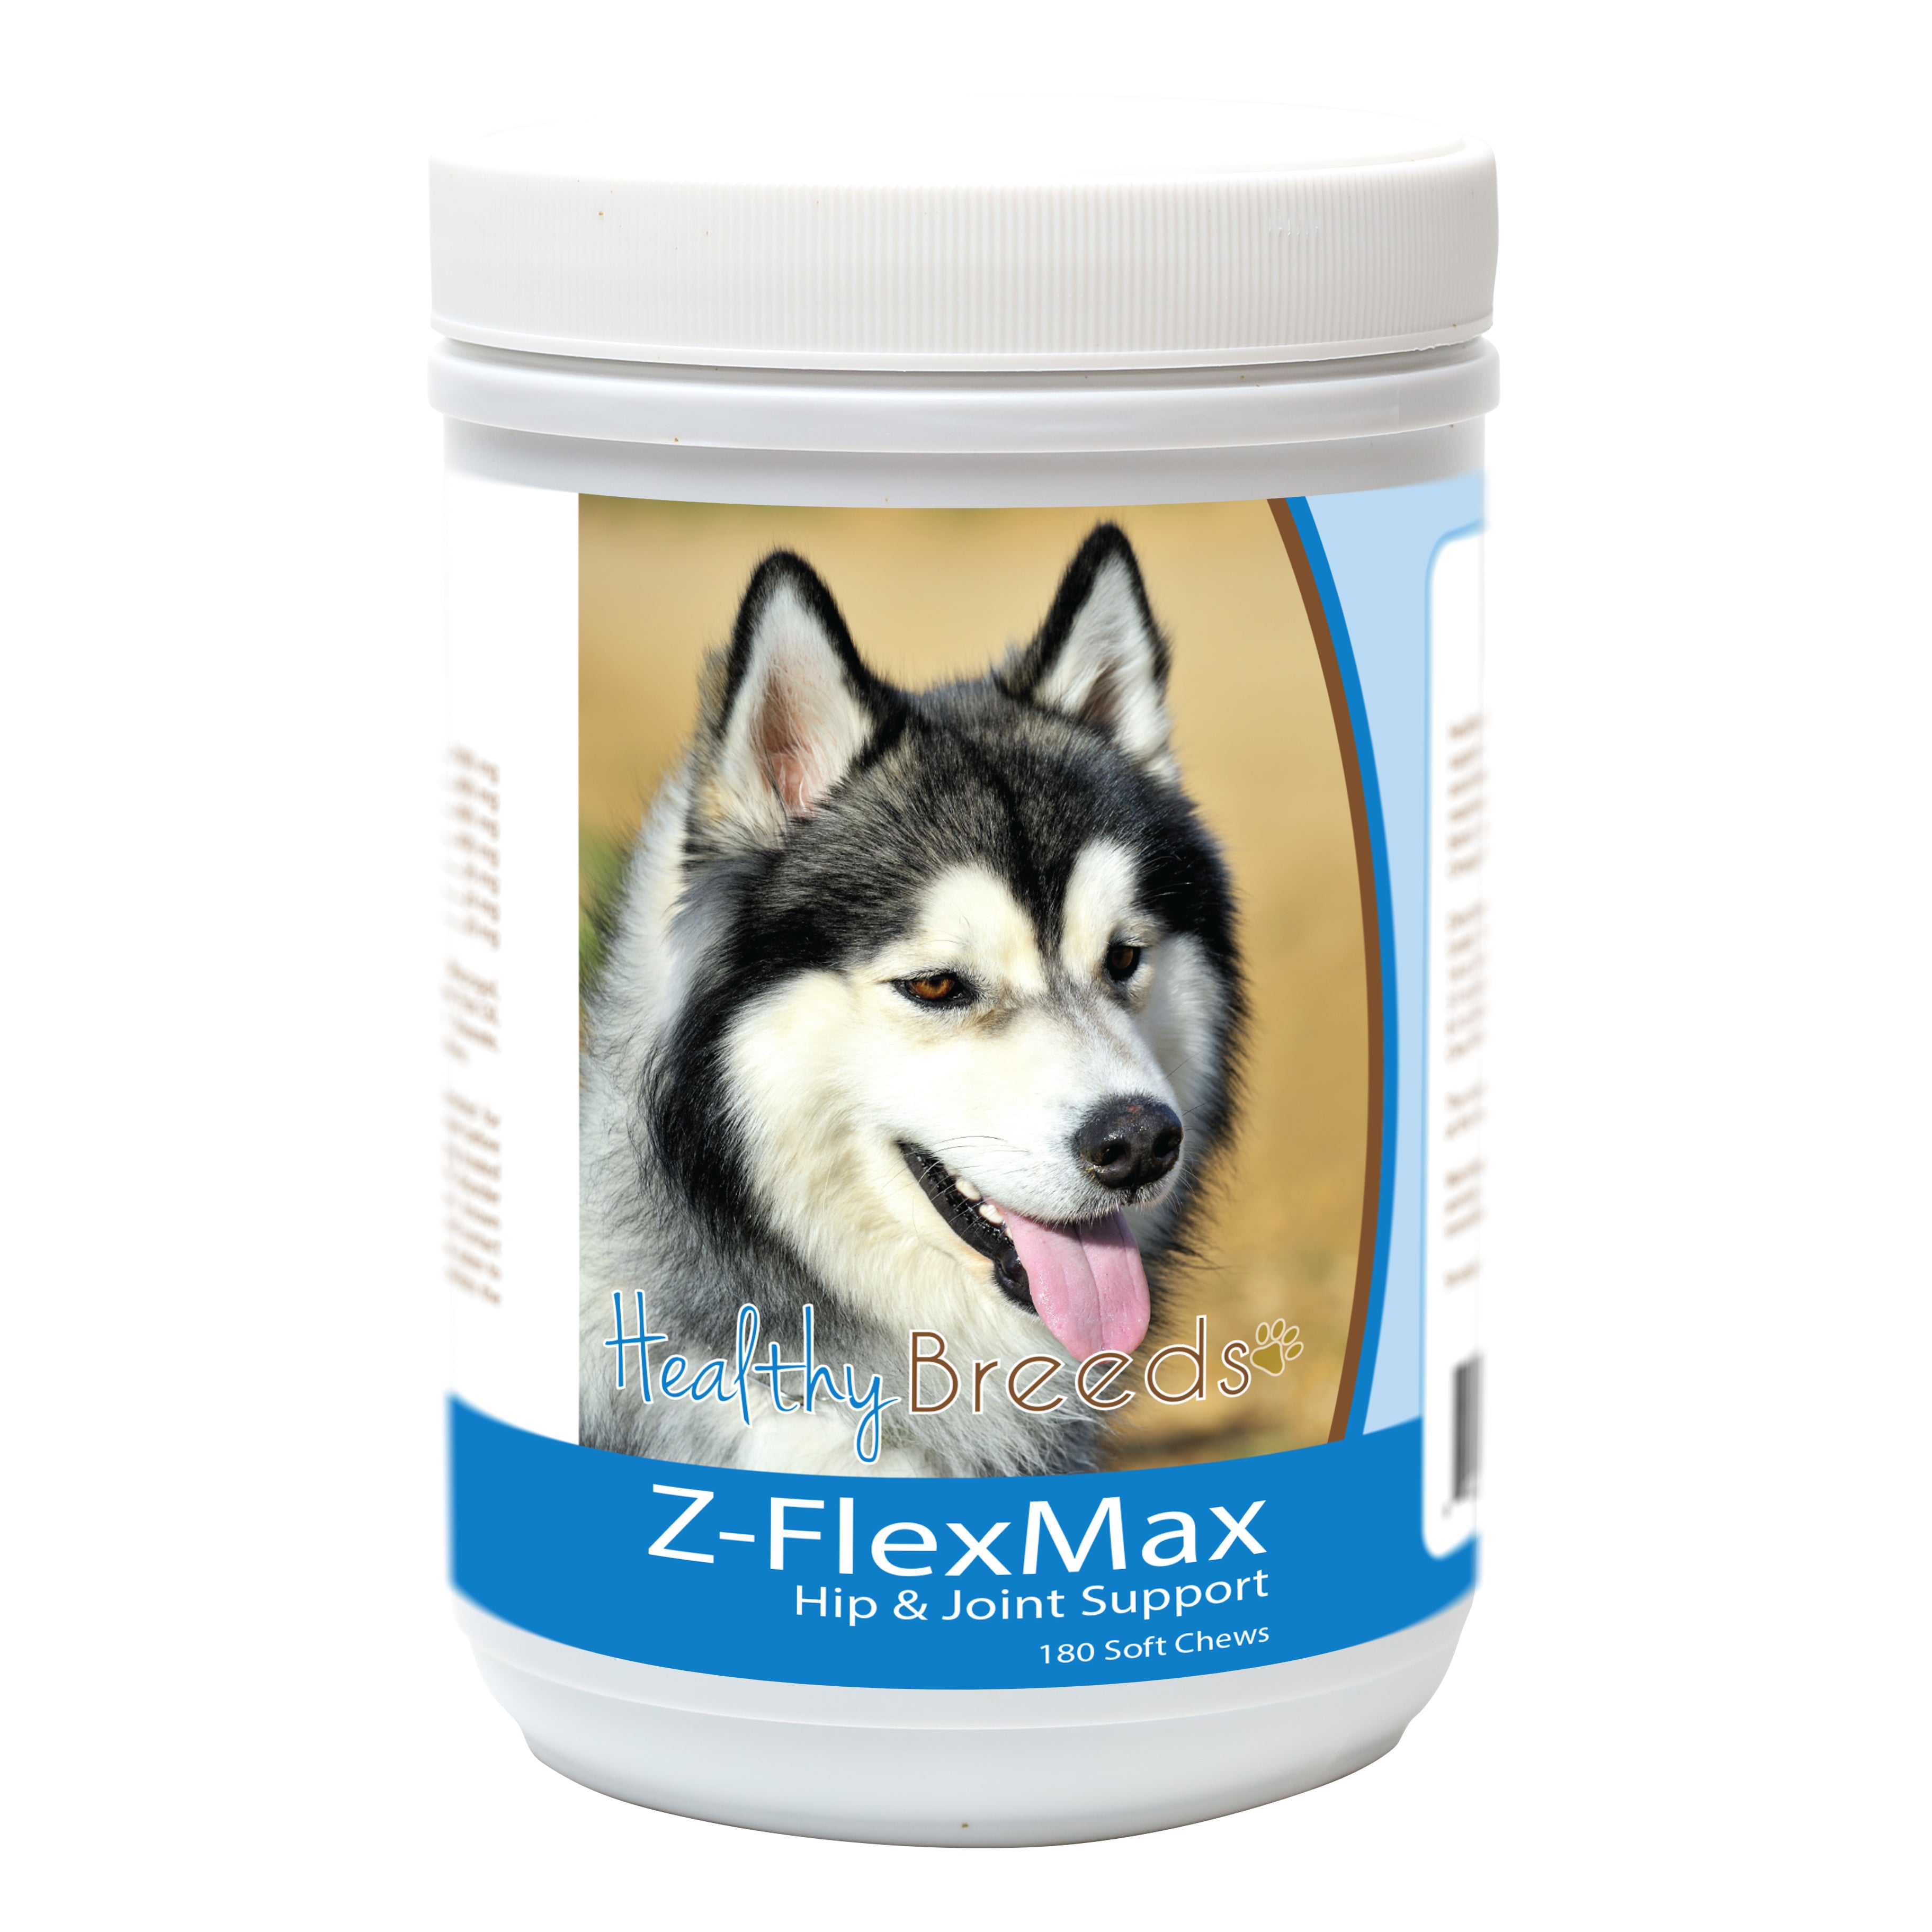 Siberian Husky Z-Flex Max Dog Hip and Joint Support 180 Count